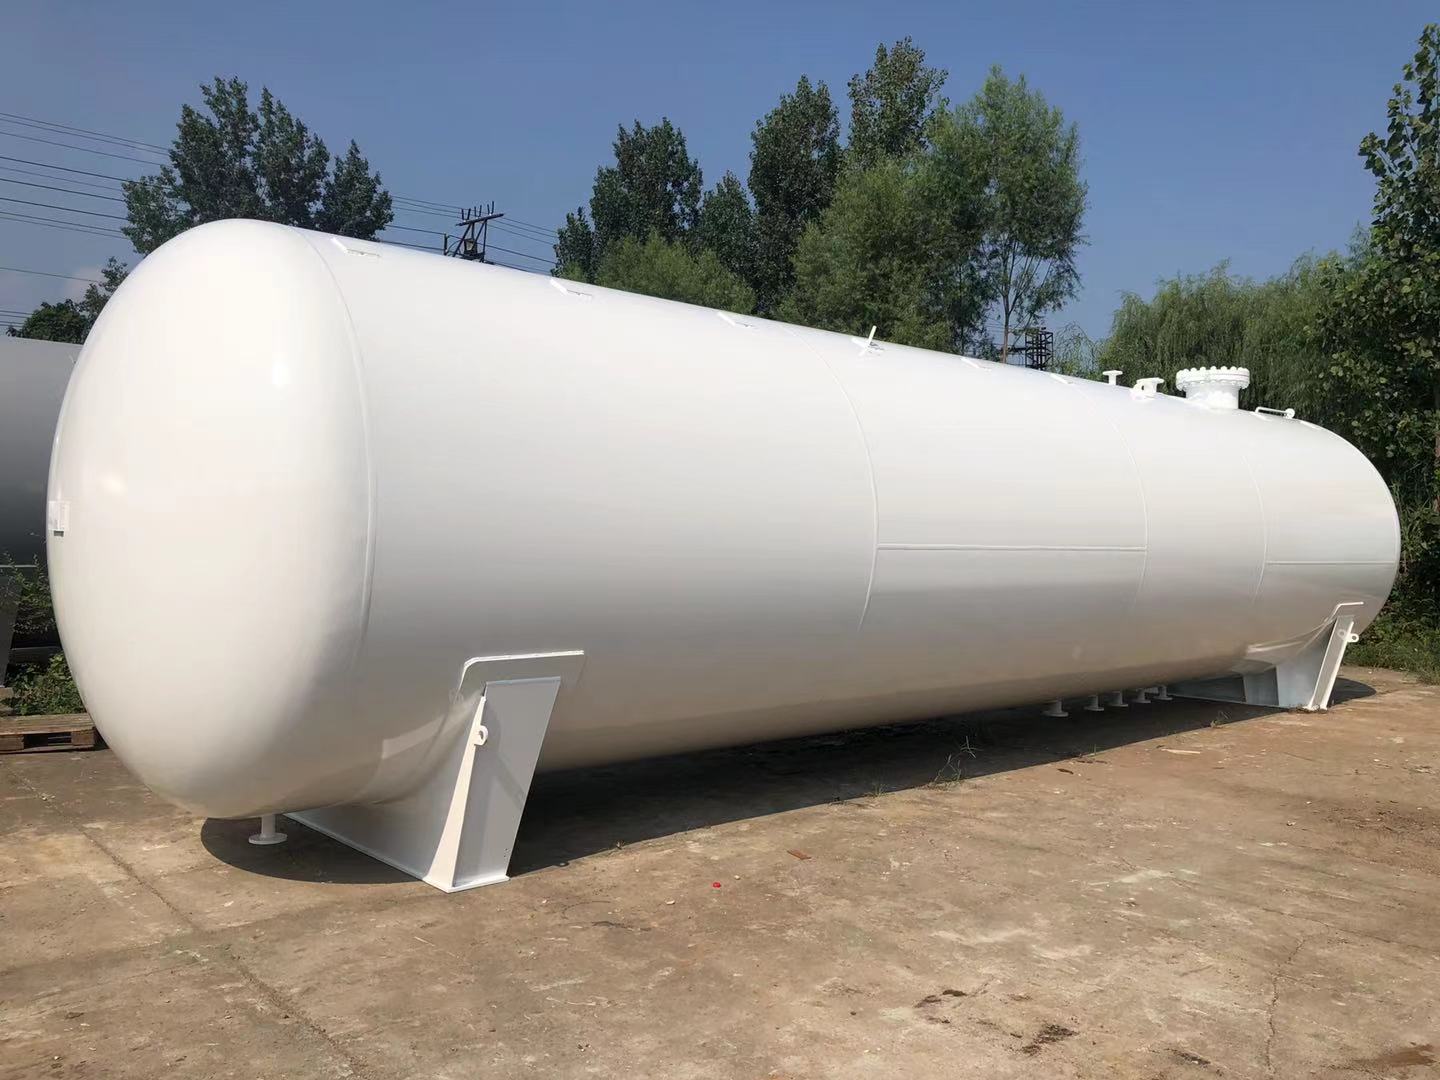 Support materials for Liquefied petroleum gas storage tanks